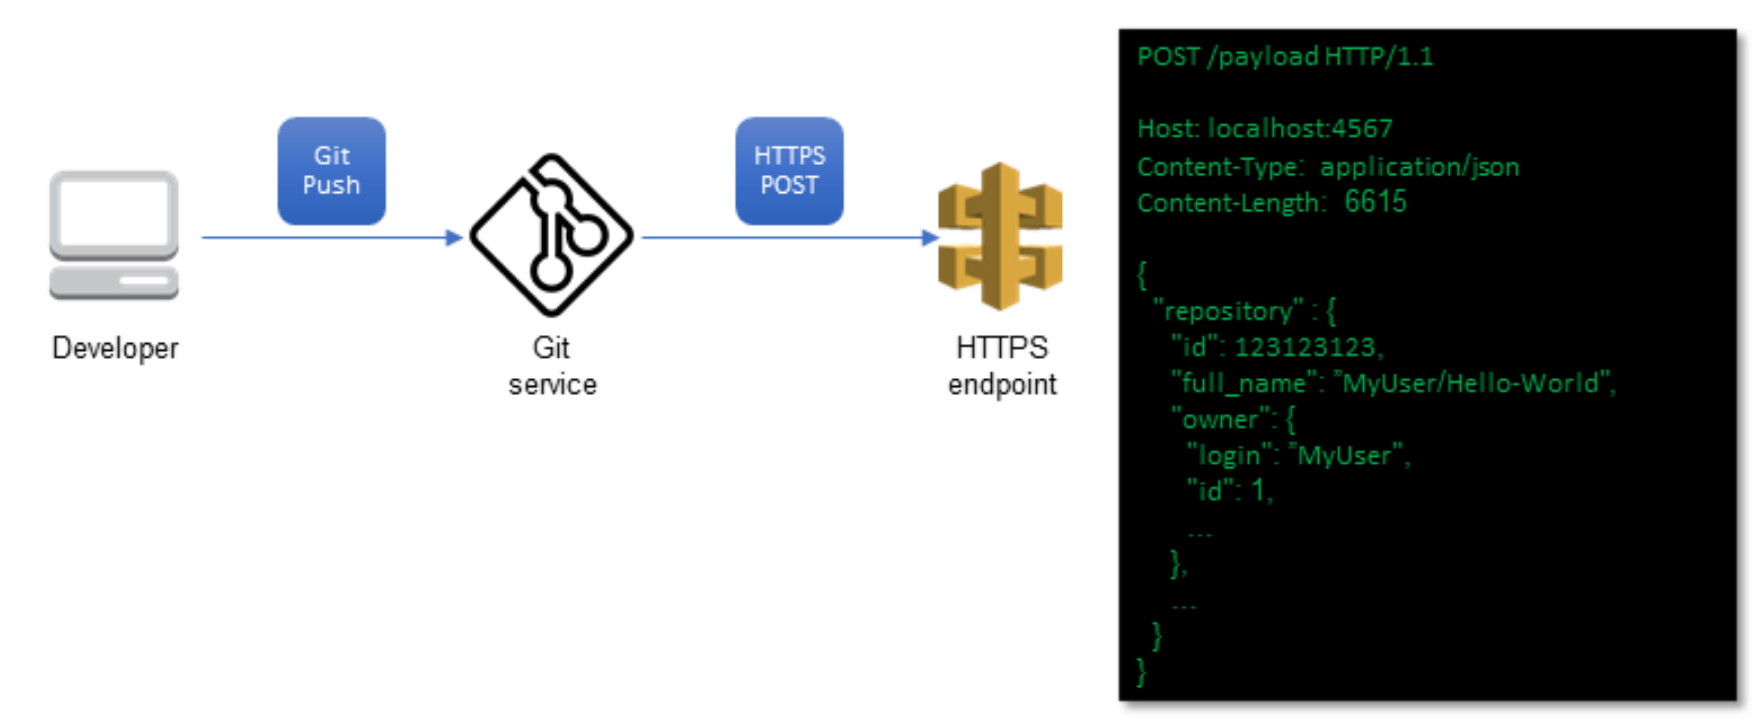 Workflow for triggering the webhook